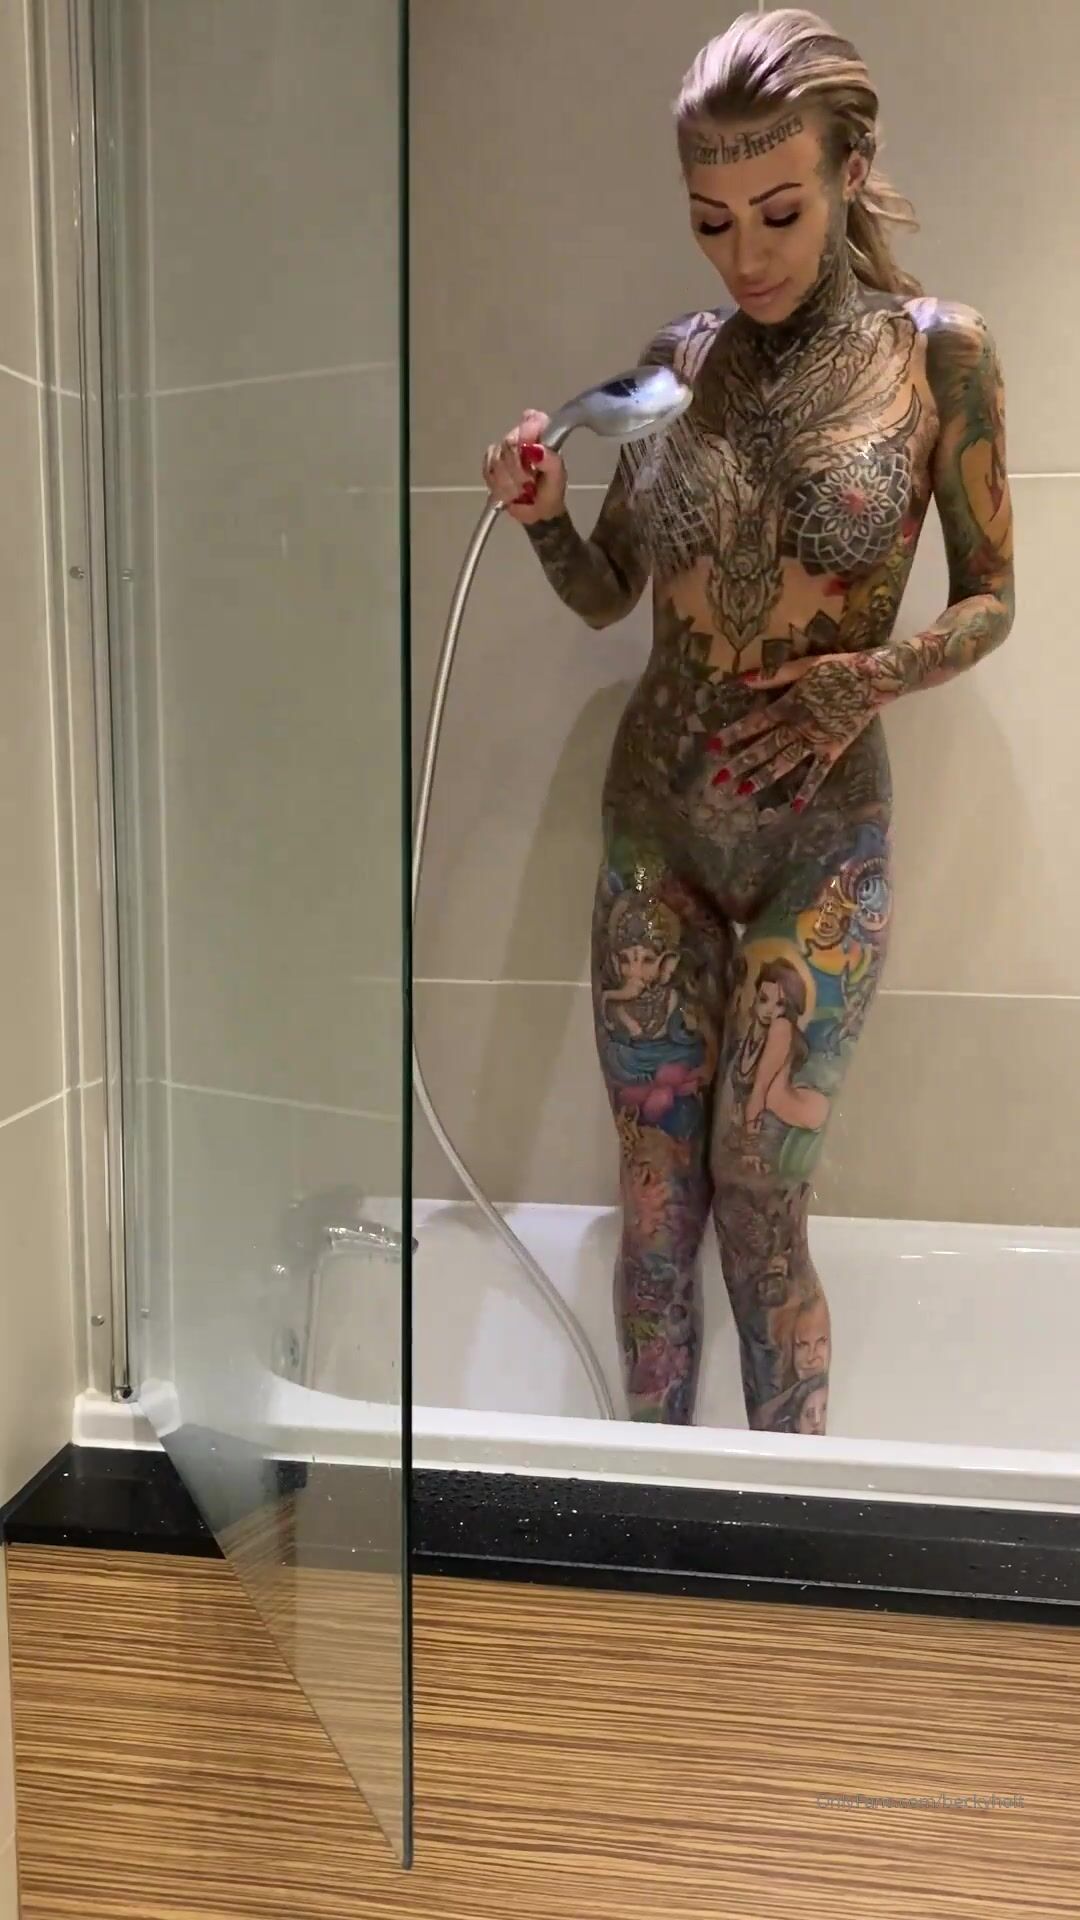 beckyholt shower time who wants to